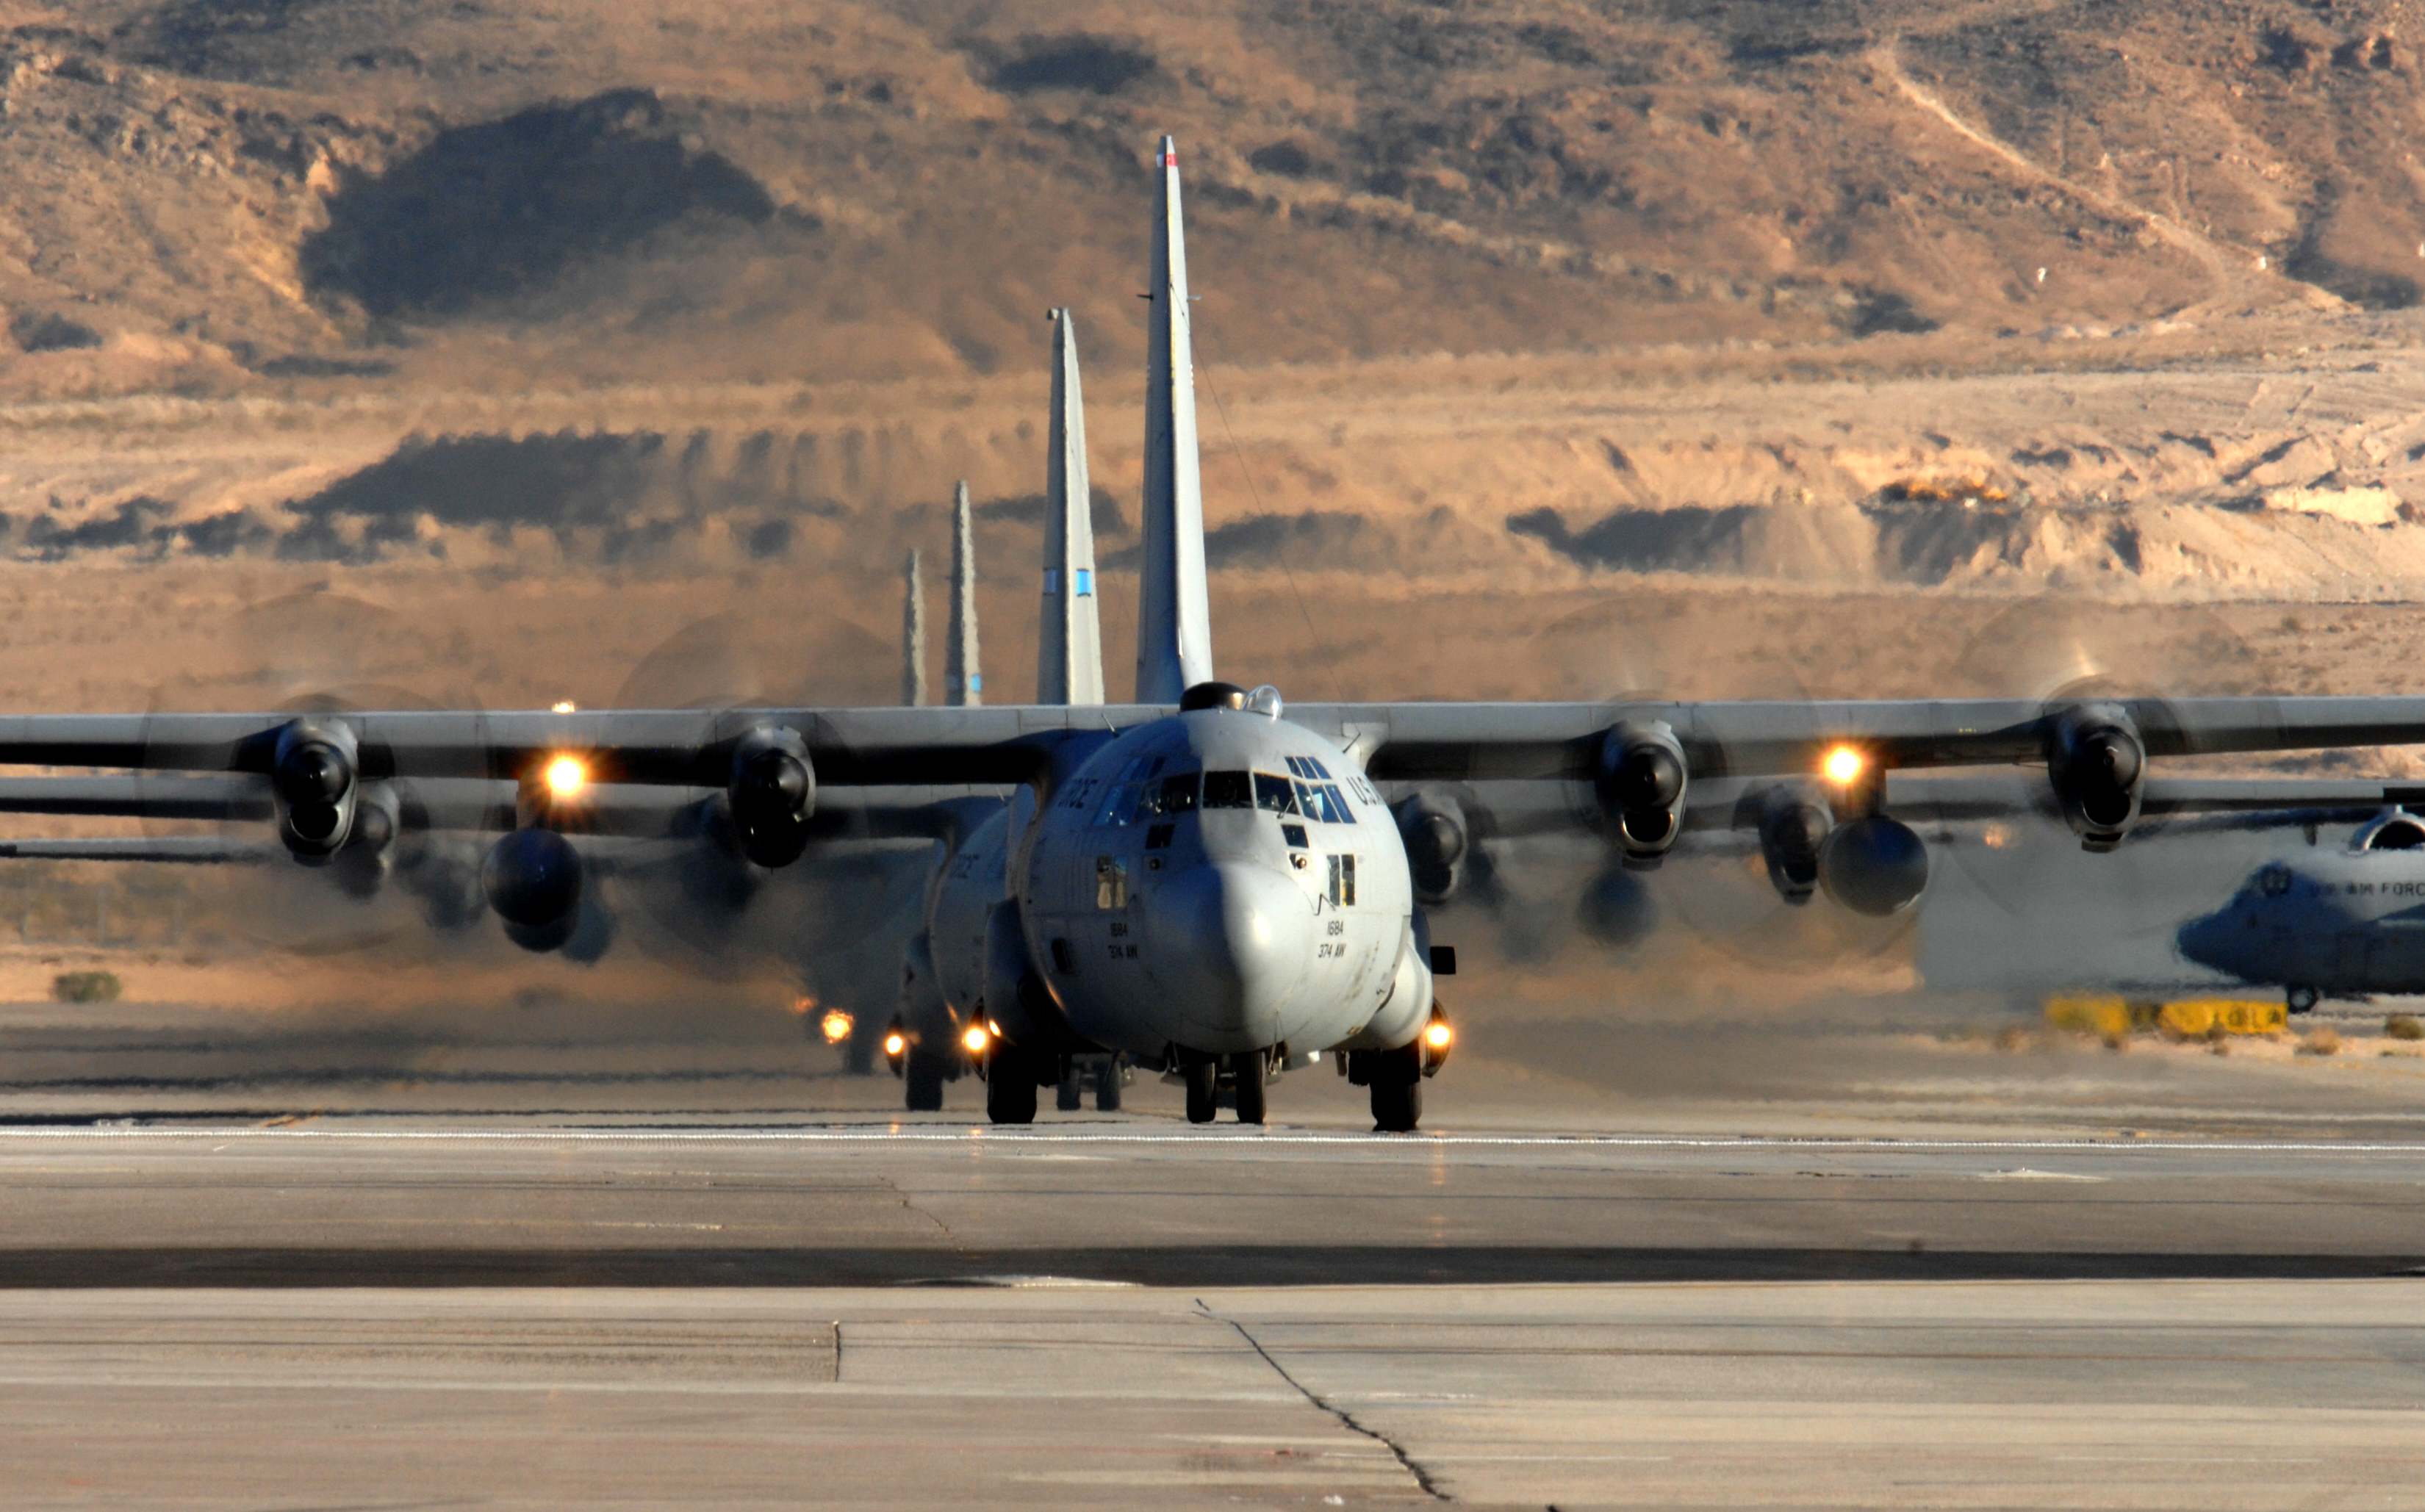 C-130s taxi in formation - 081119-F-0782R-291